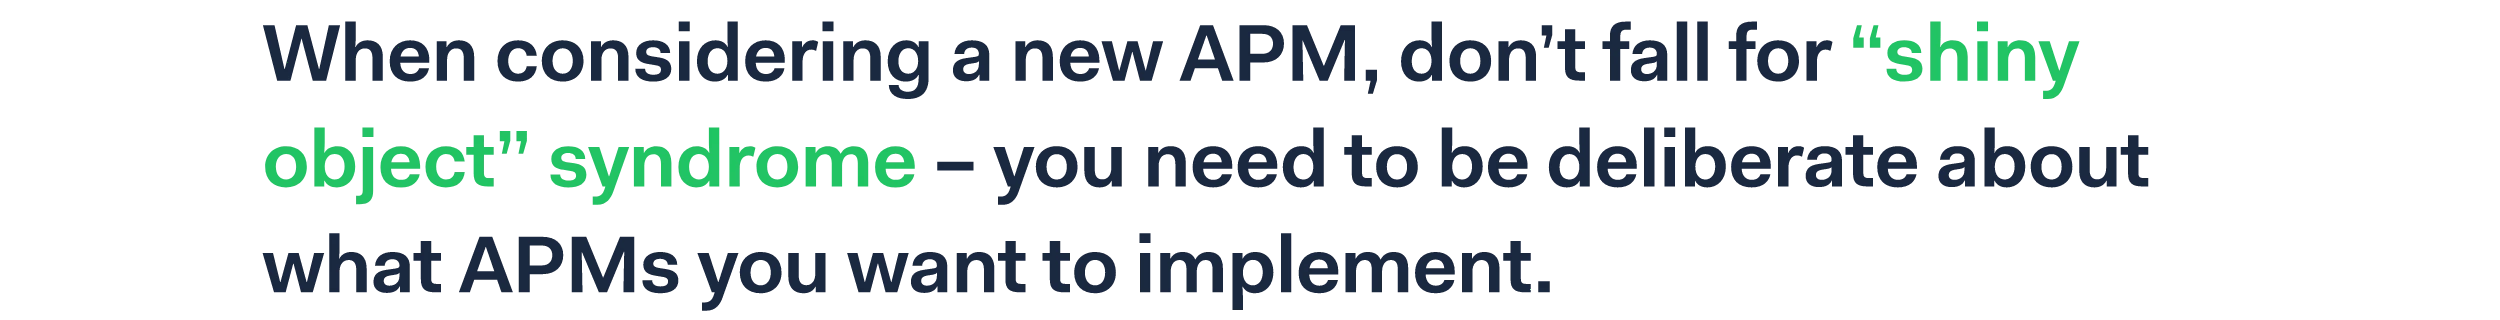 When considering a new APM, don’t fall for “shiny object” syndrome – you need to be deliberate about what APMs you want to implement.